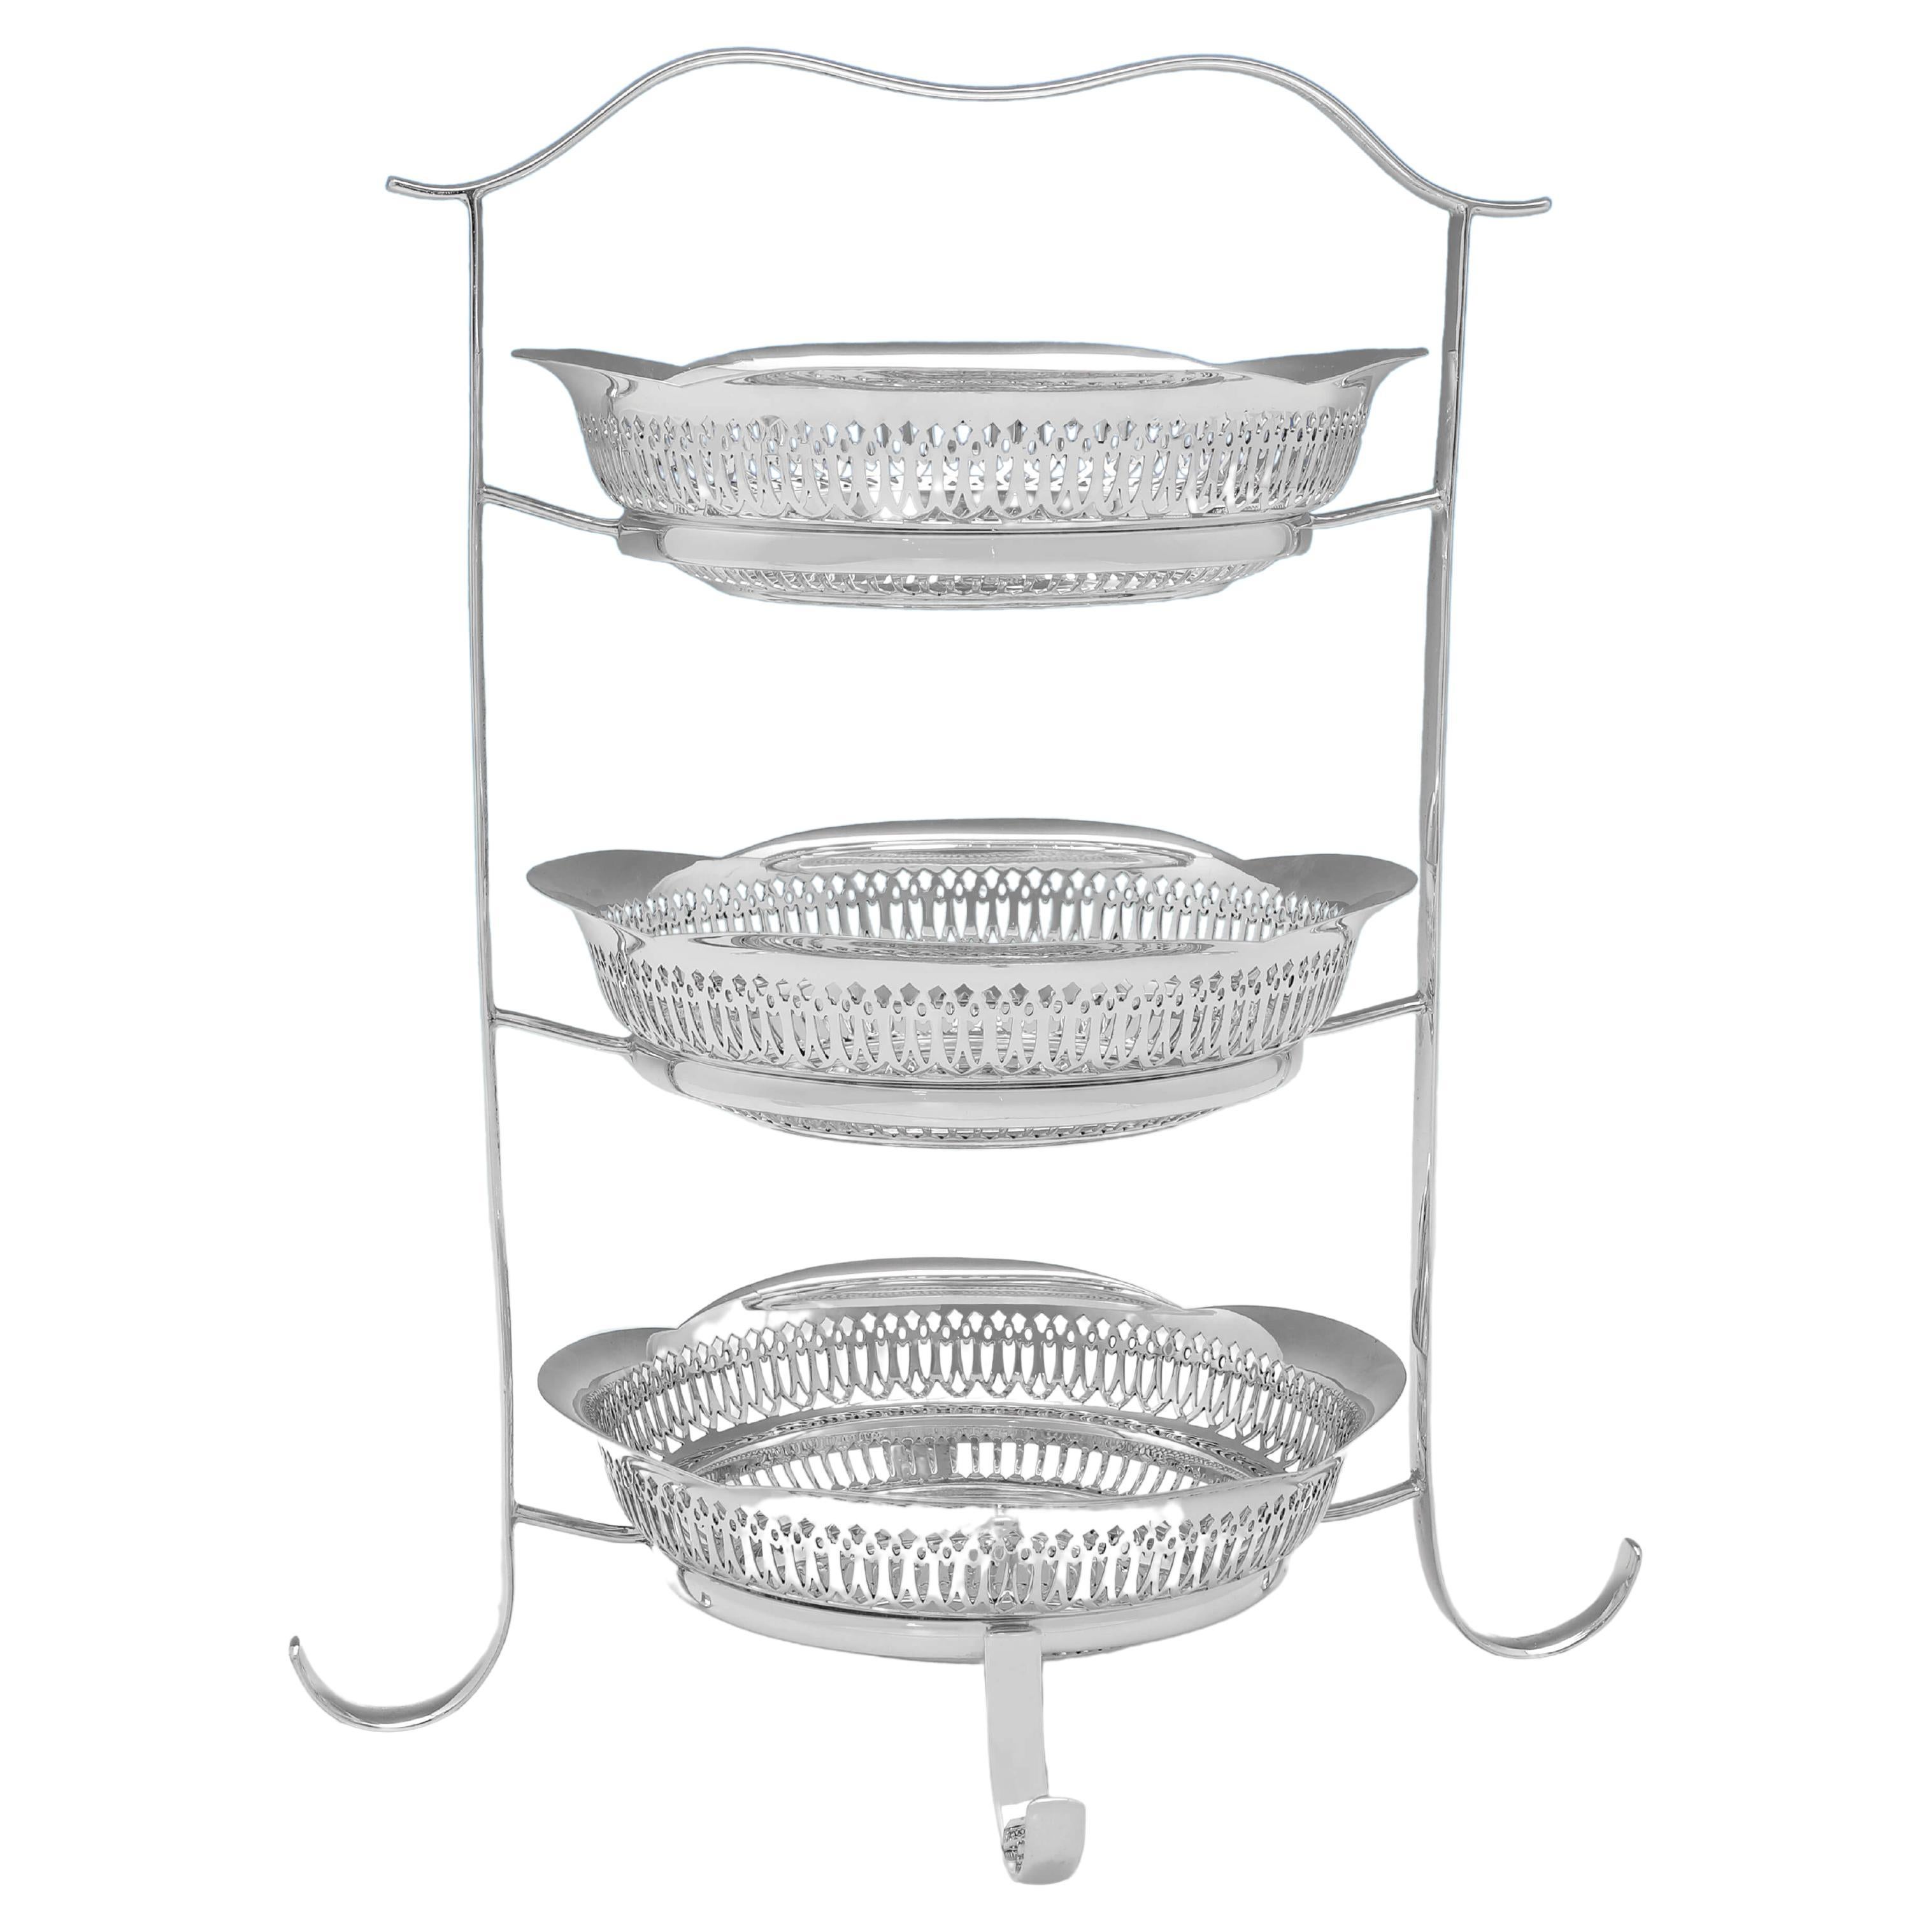 Antique Silver Plated Cake Stand, Afternoon Tea, circa 1910